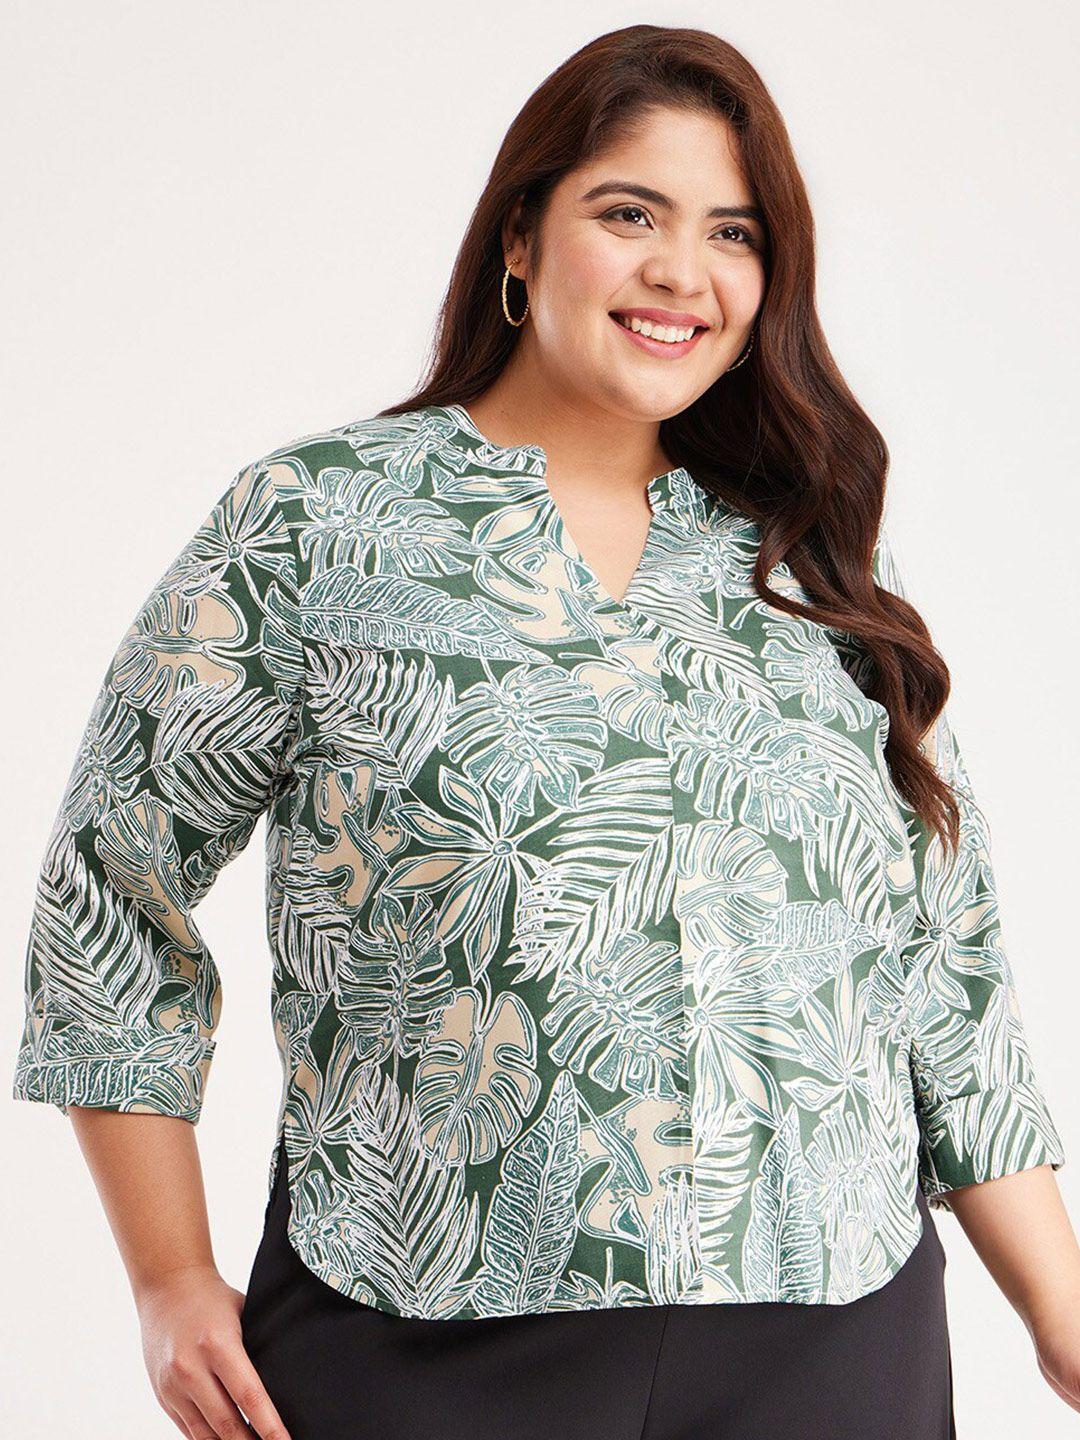 fablestreet x plus size tropical printed shirt style top